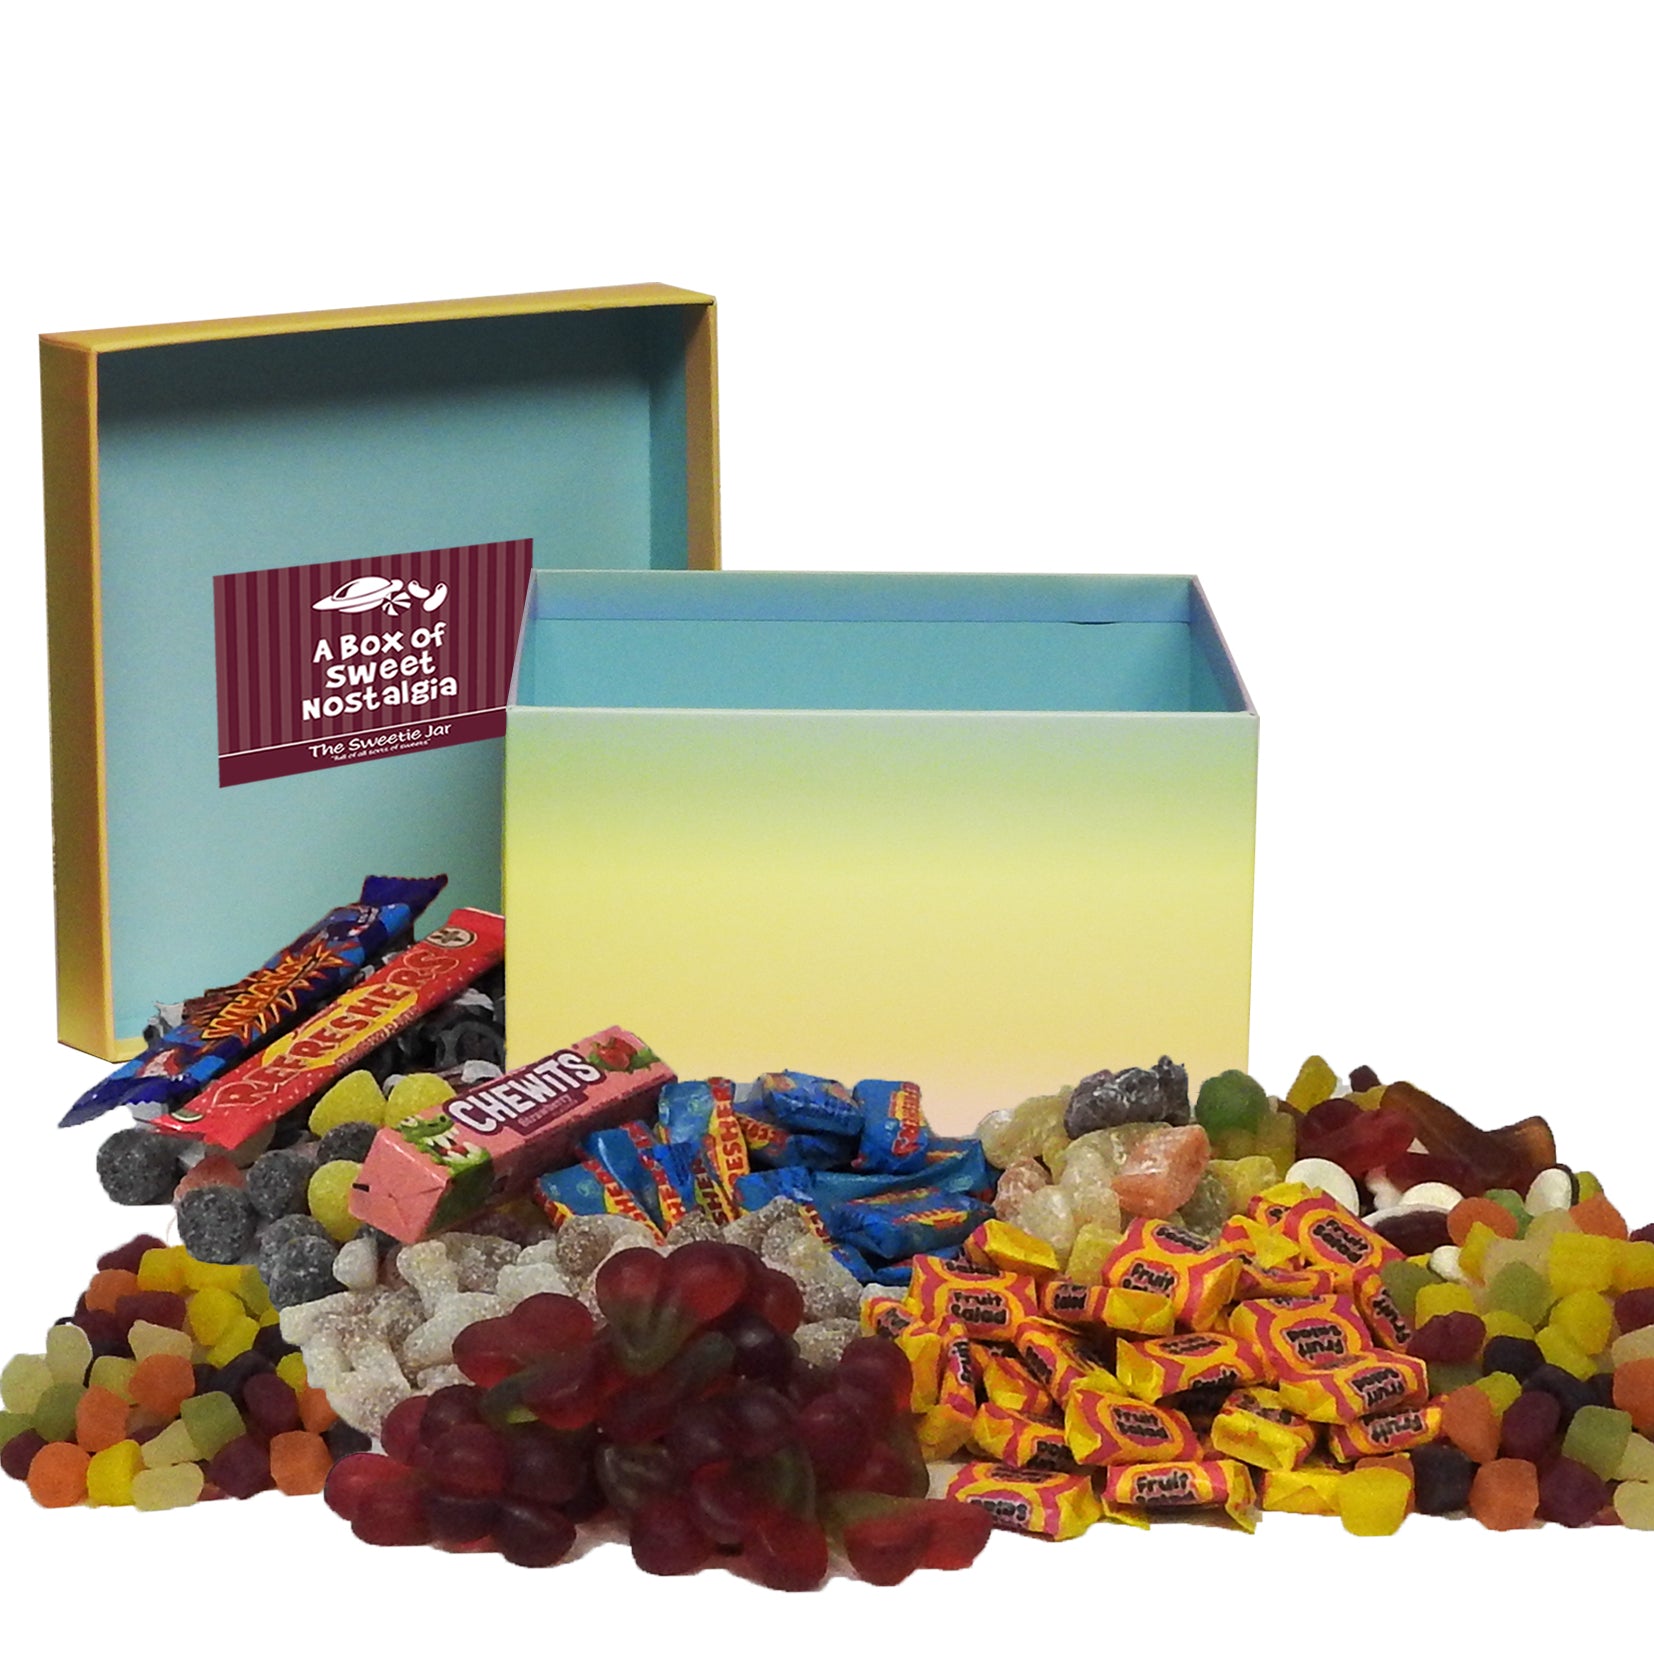 Chews & Jelly Sweets Gift Box : Medium - Retro Sweets Gift Boxes at The Sweetie Jar